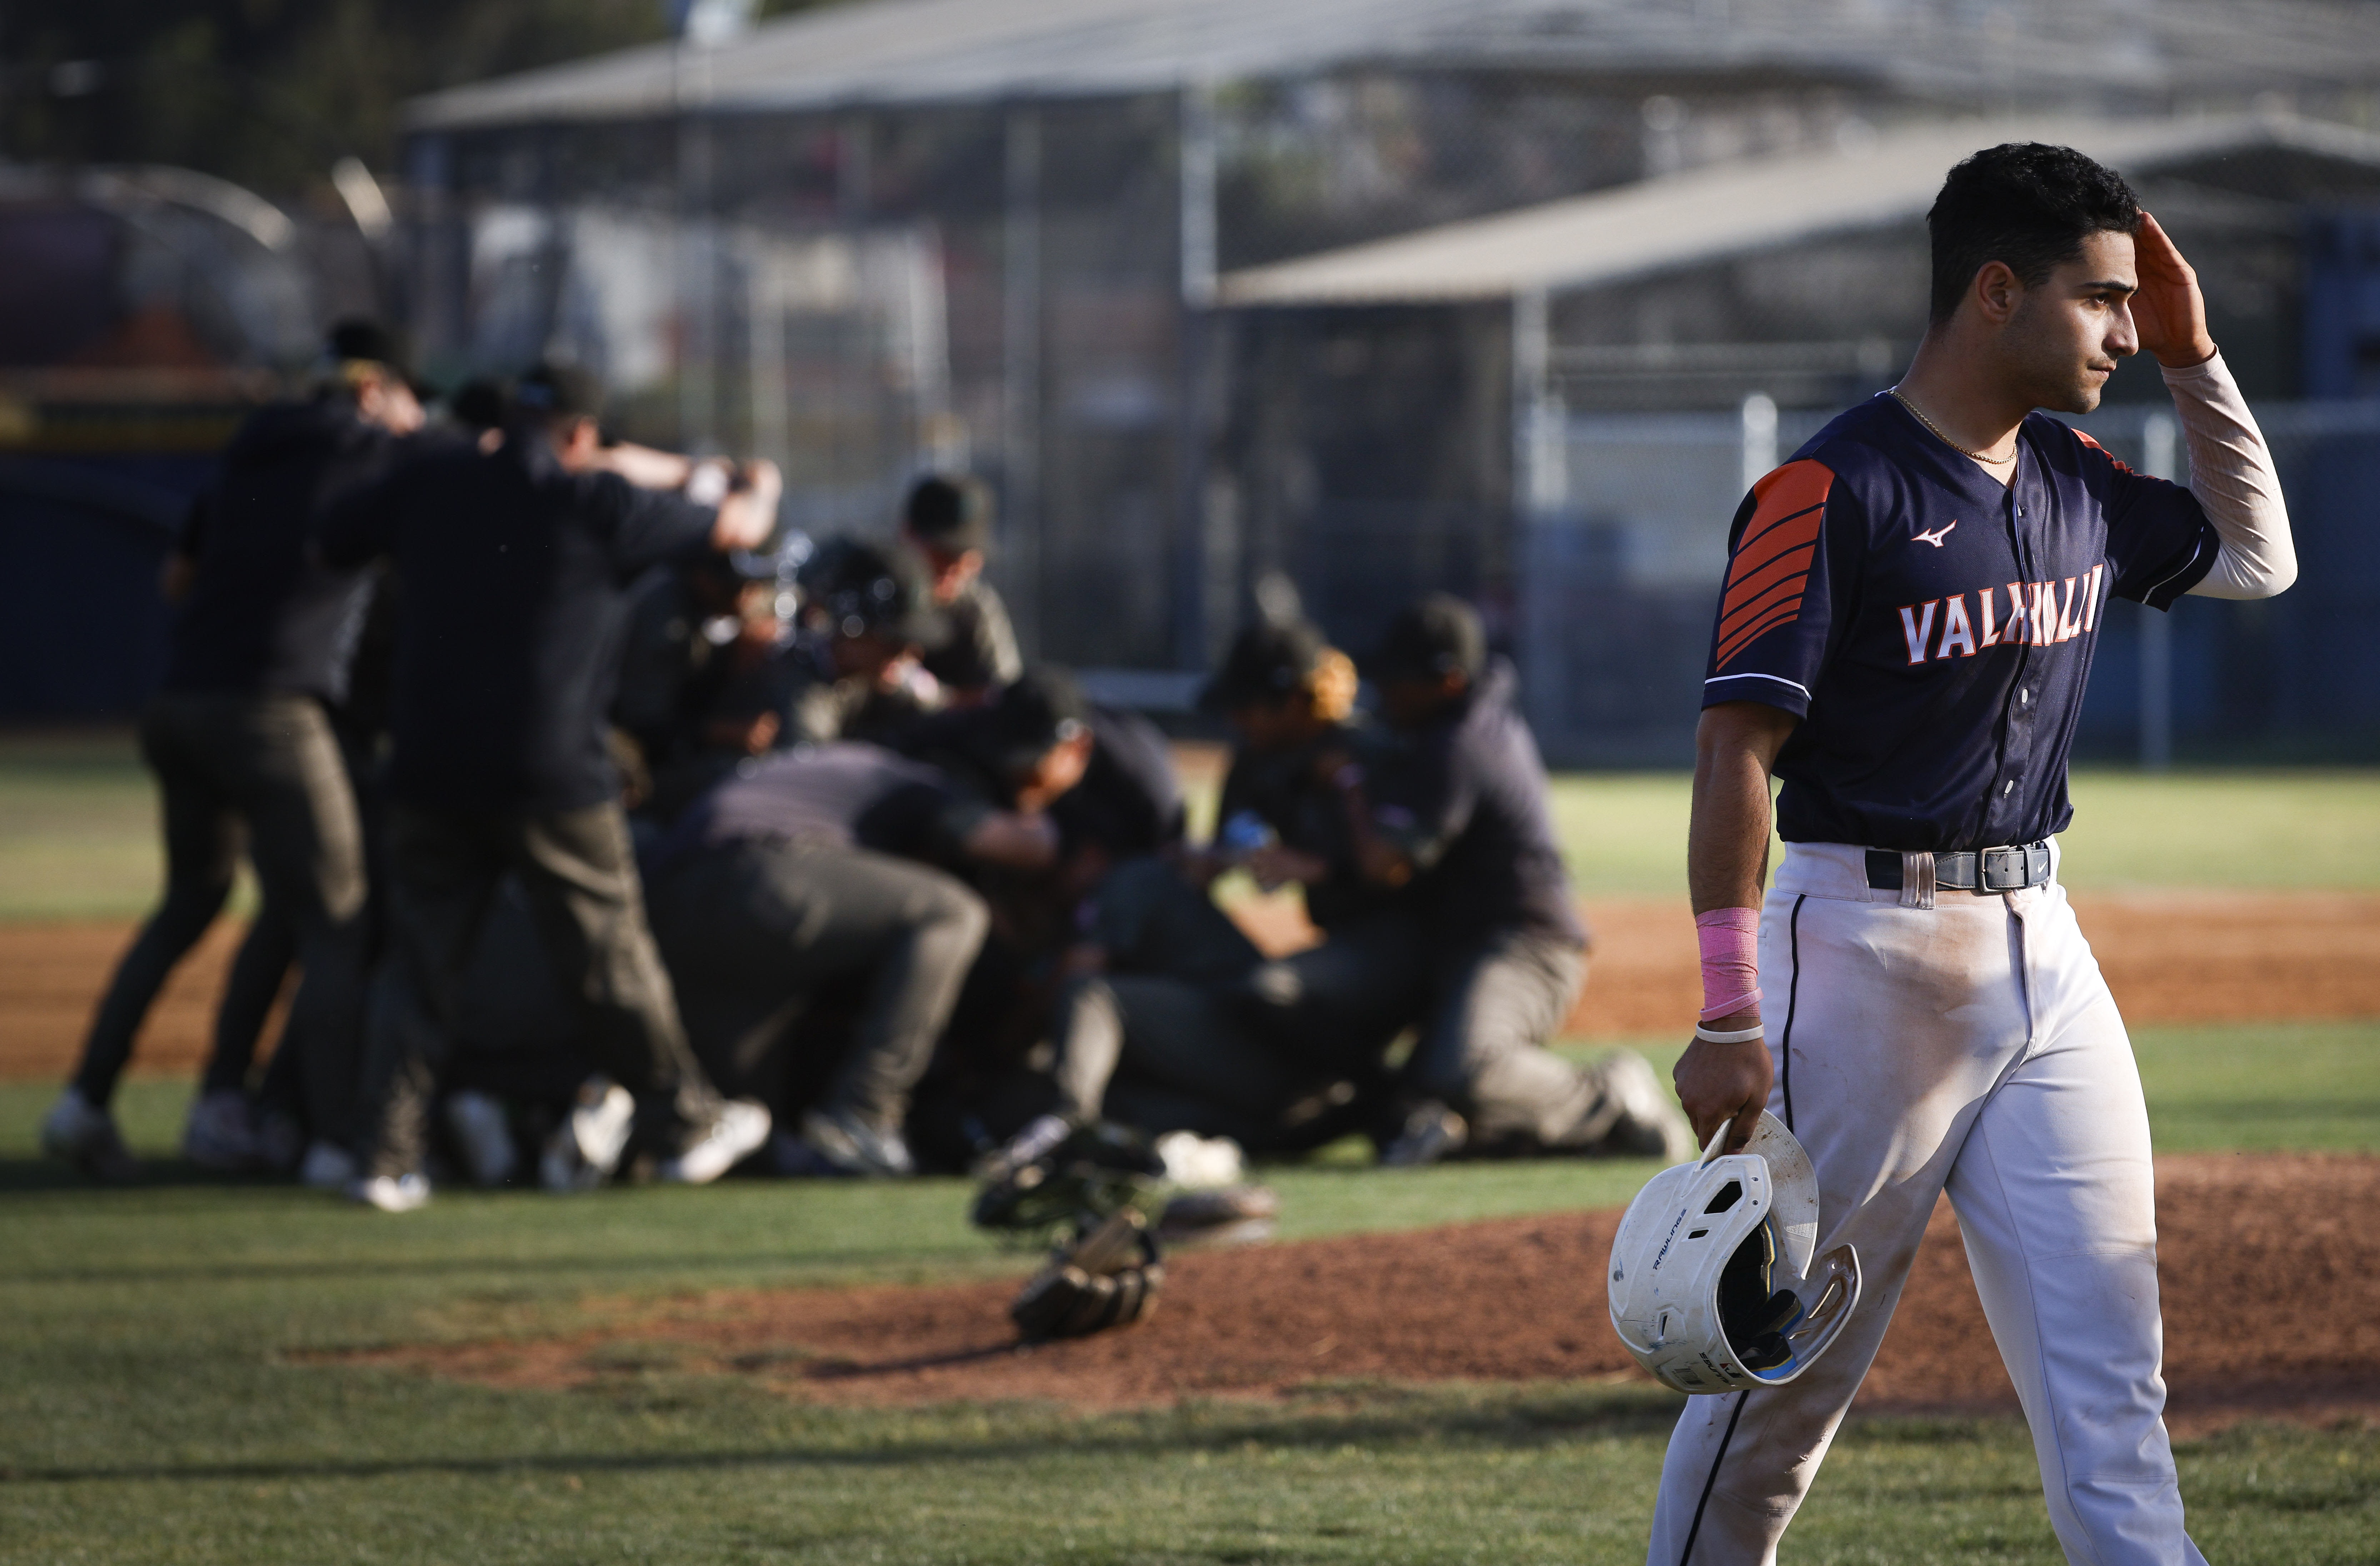 Valhalla's season ends with SoCal Regional playoff loss to Oxnard Pacifica